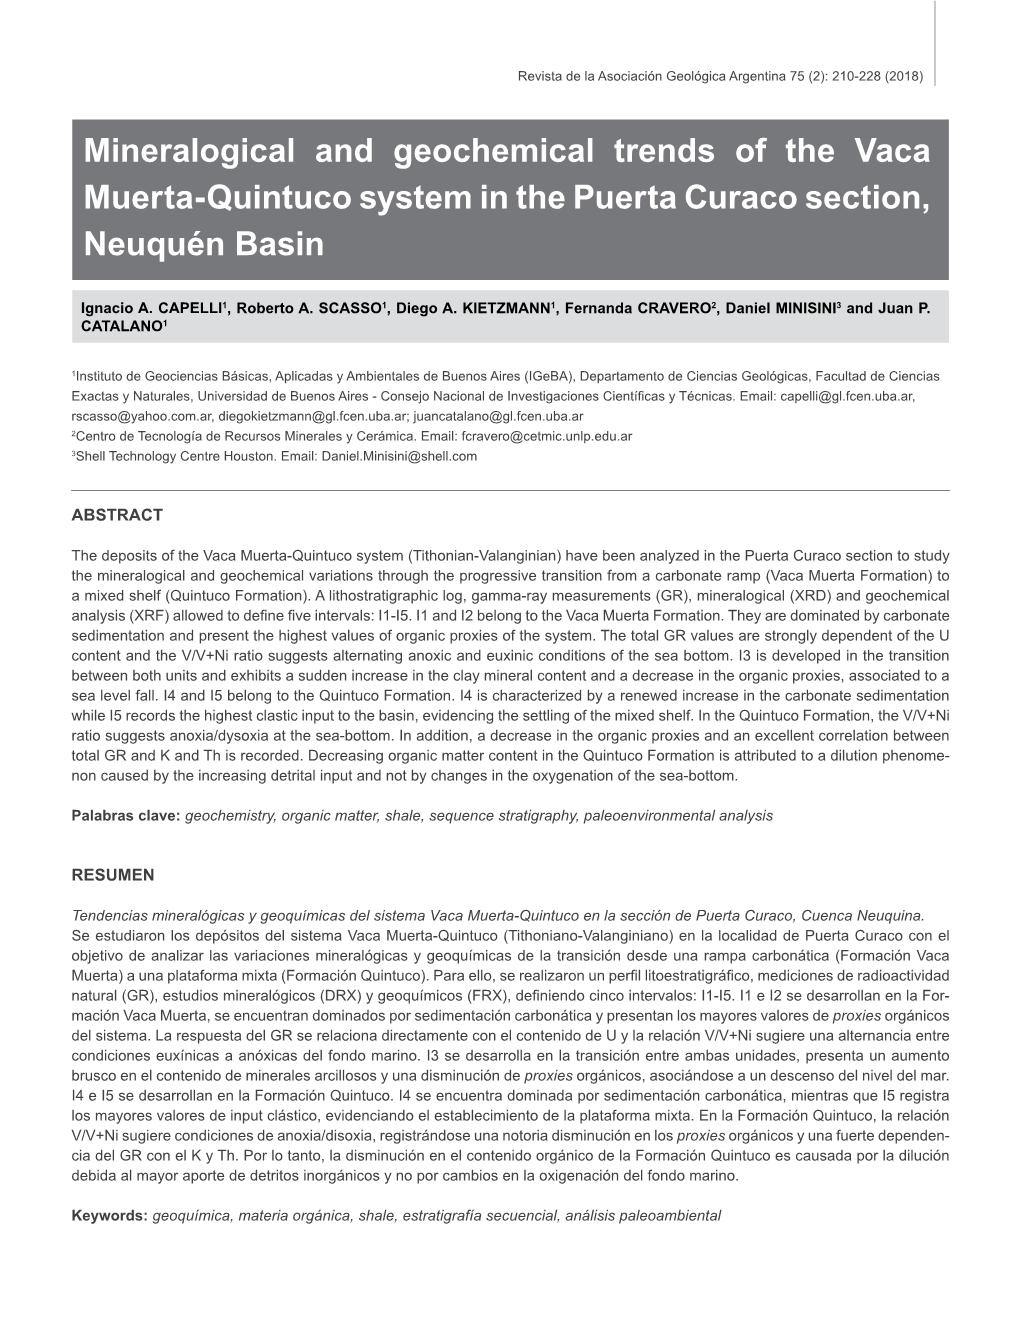 Mineralogical and Geochemical Trends of the Vaca Muerta-Quintuco System in the Puerta Curaco Section, Neuquén Basin